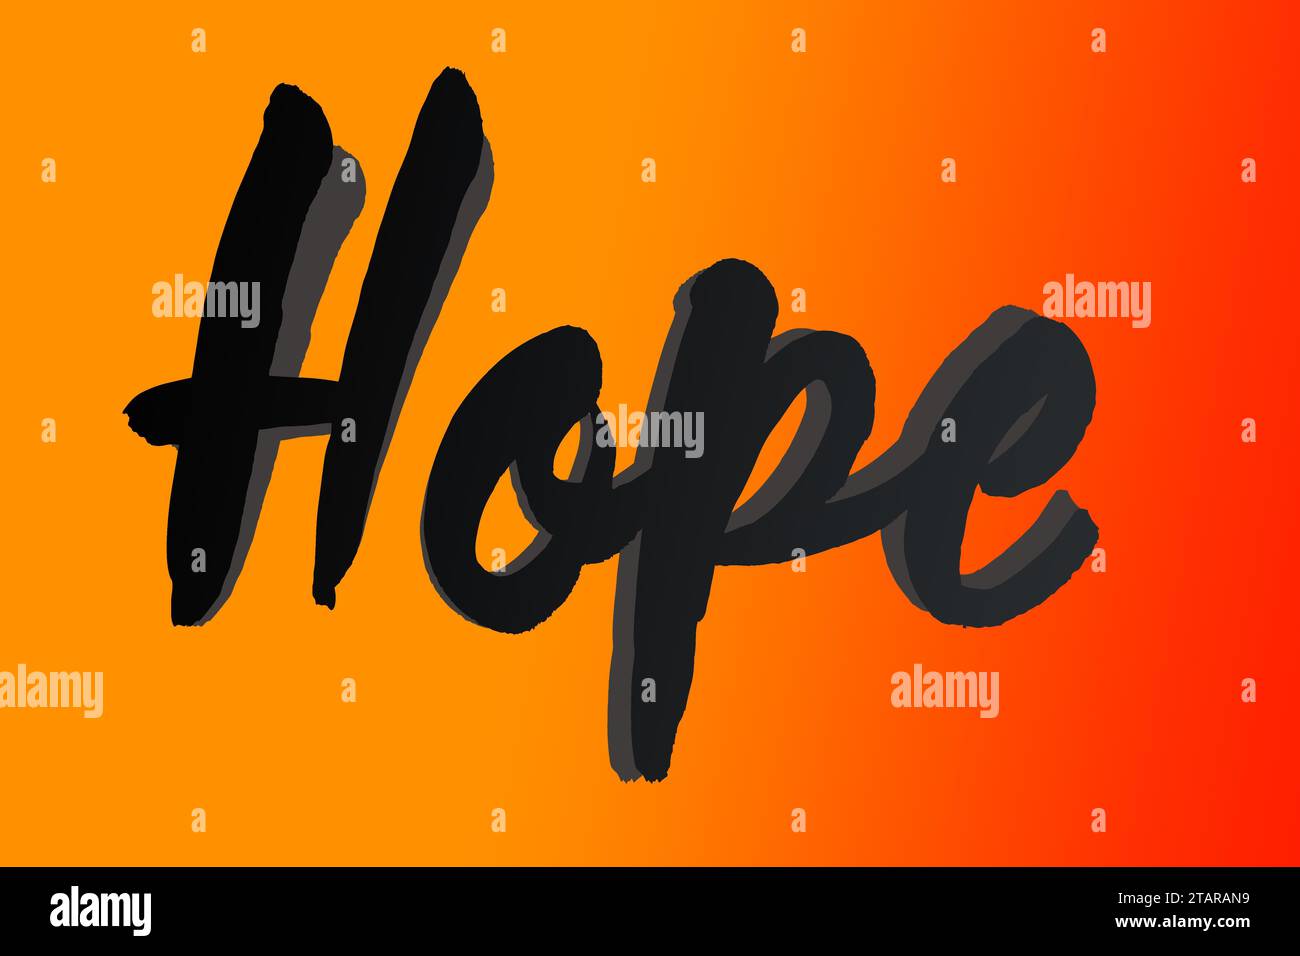 Hope word concept. Stay positive and hopeful together Stock Photo